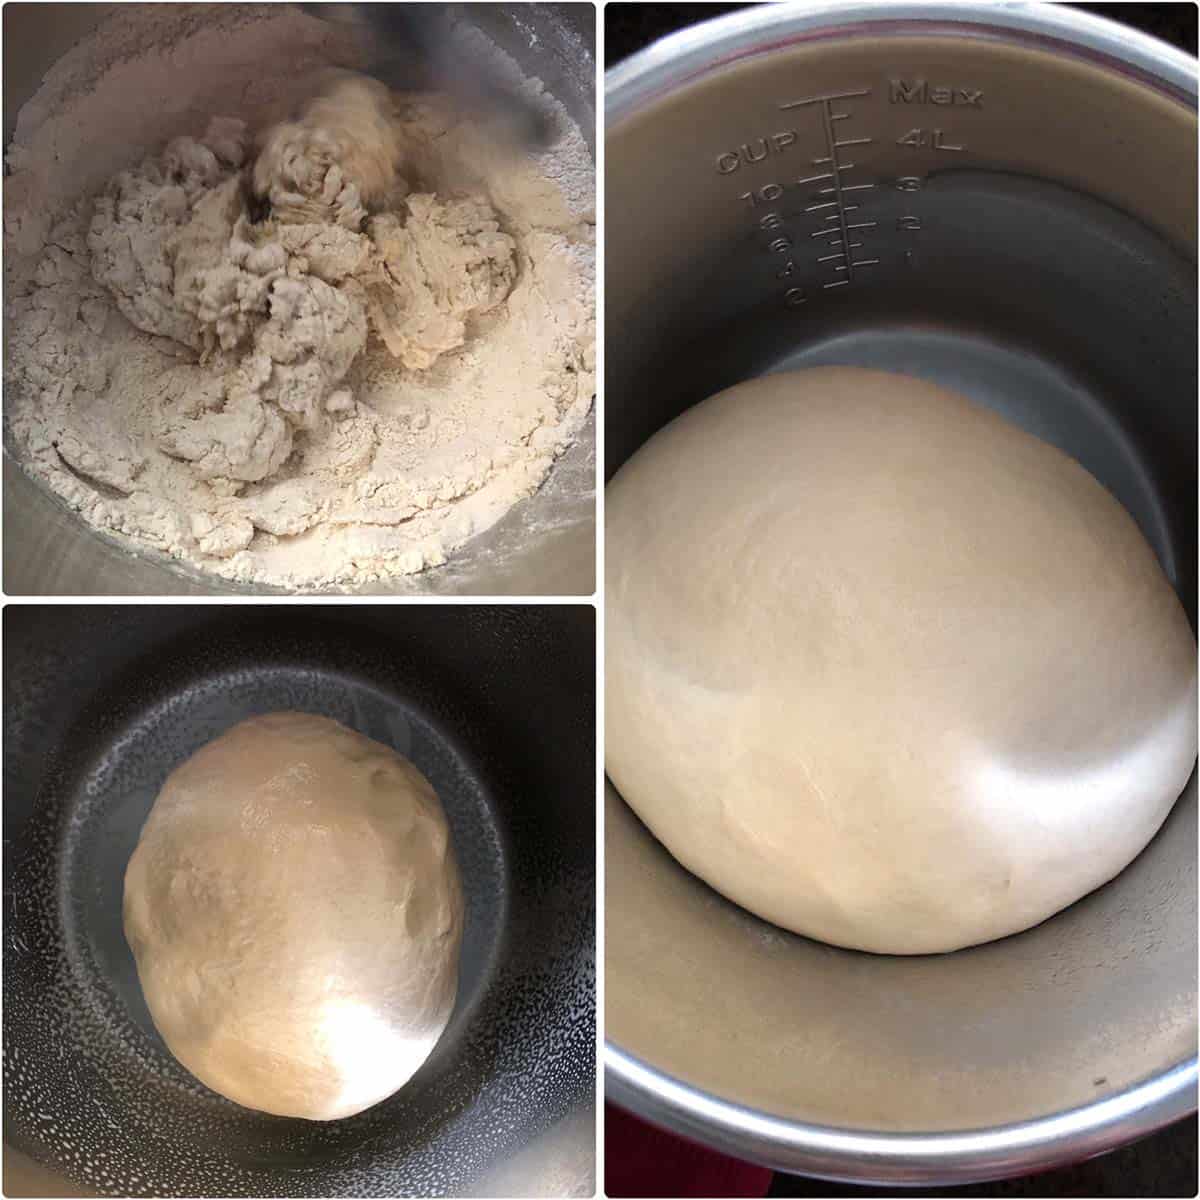 3 panel photo showing the making of the dough and after first rise.